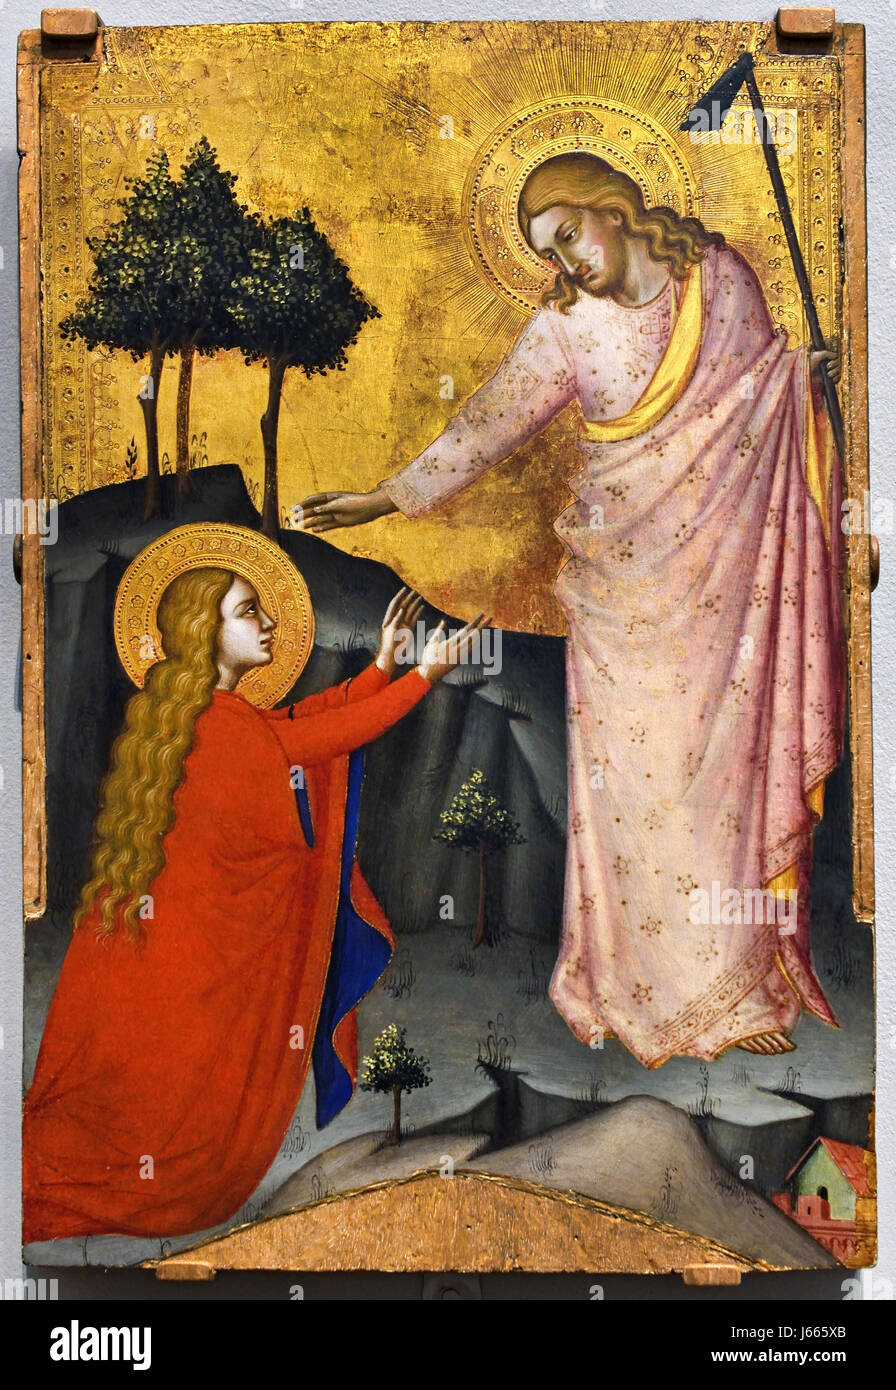 Italy Italian Noli me tangere,1368-70 Probably by, Jacopo di Cione  1365 -1400 Italy Italian,  (  New Testament (John 20: 14-18) tells how Mary Magdalene at first mistook the Risen Christ for a gardener: he is shown holding a hoe. She kneels before him and Christ urges her not to touch him, saying 'Noli me tangere'.) Stock Photo